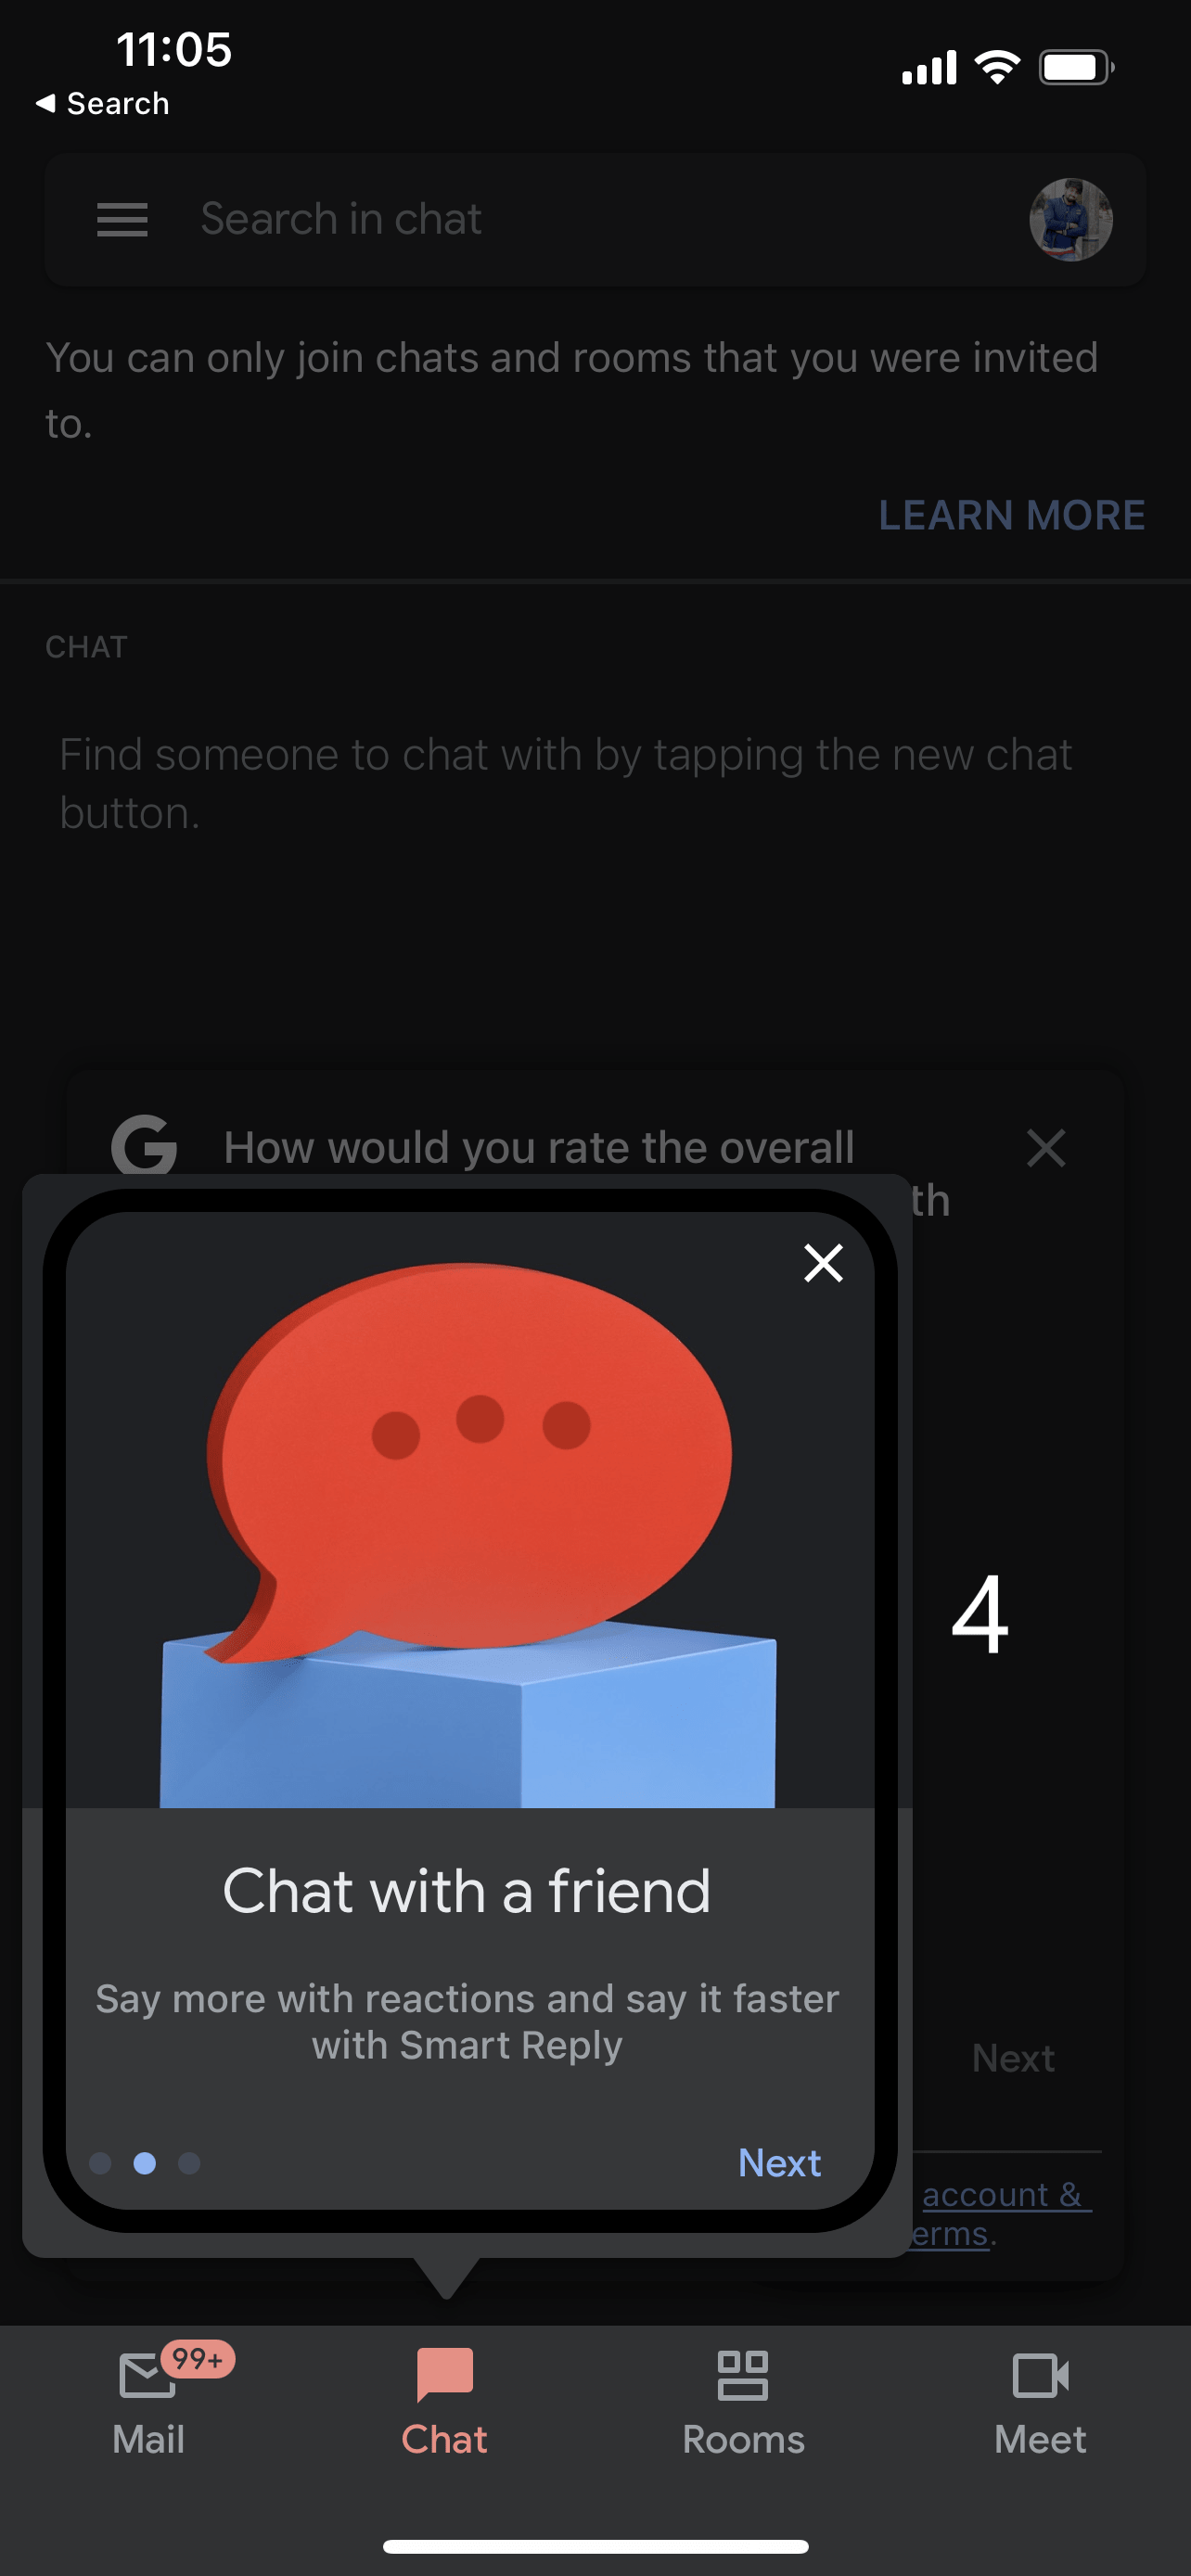 Chat with a friend on Android and iOS allows you to chat will your colleagues